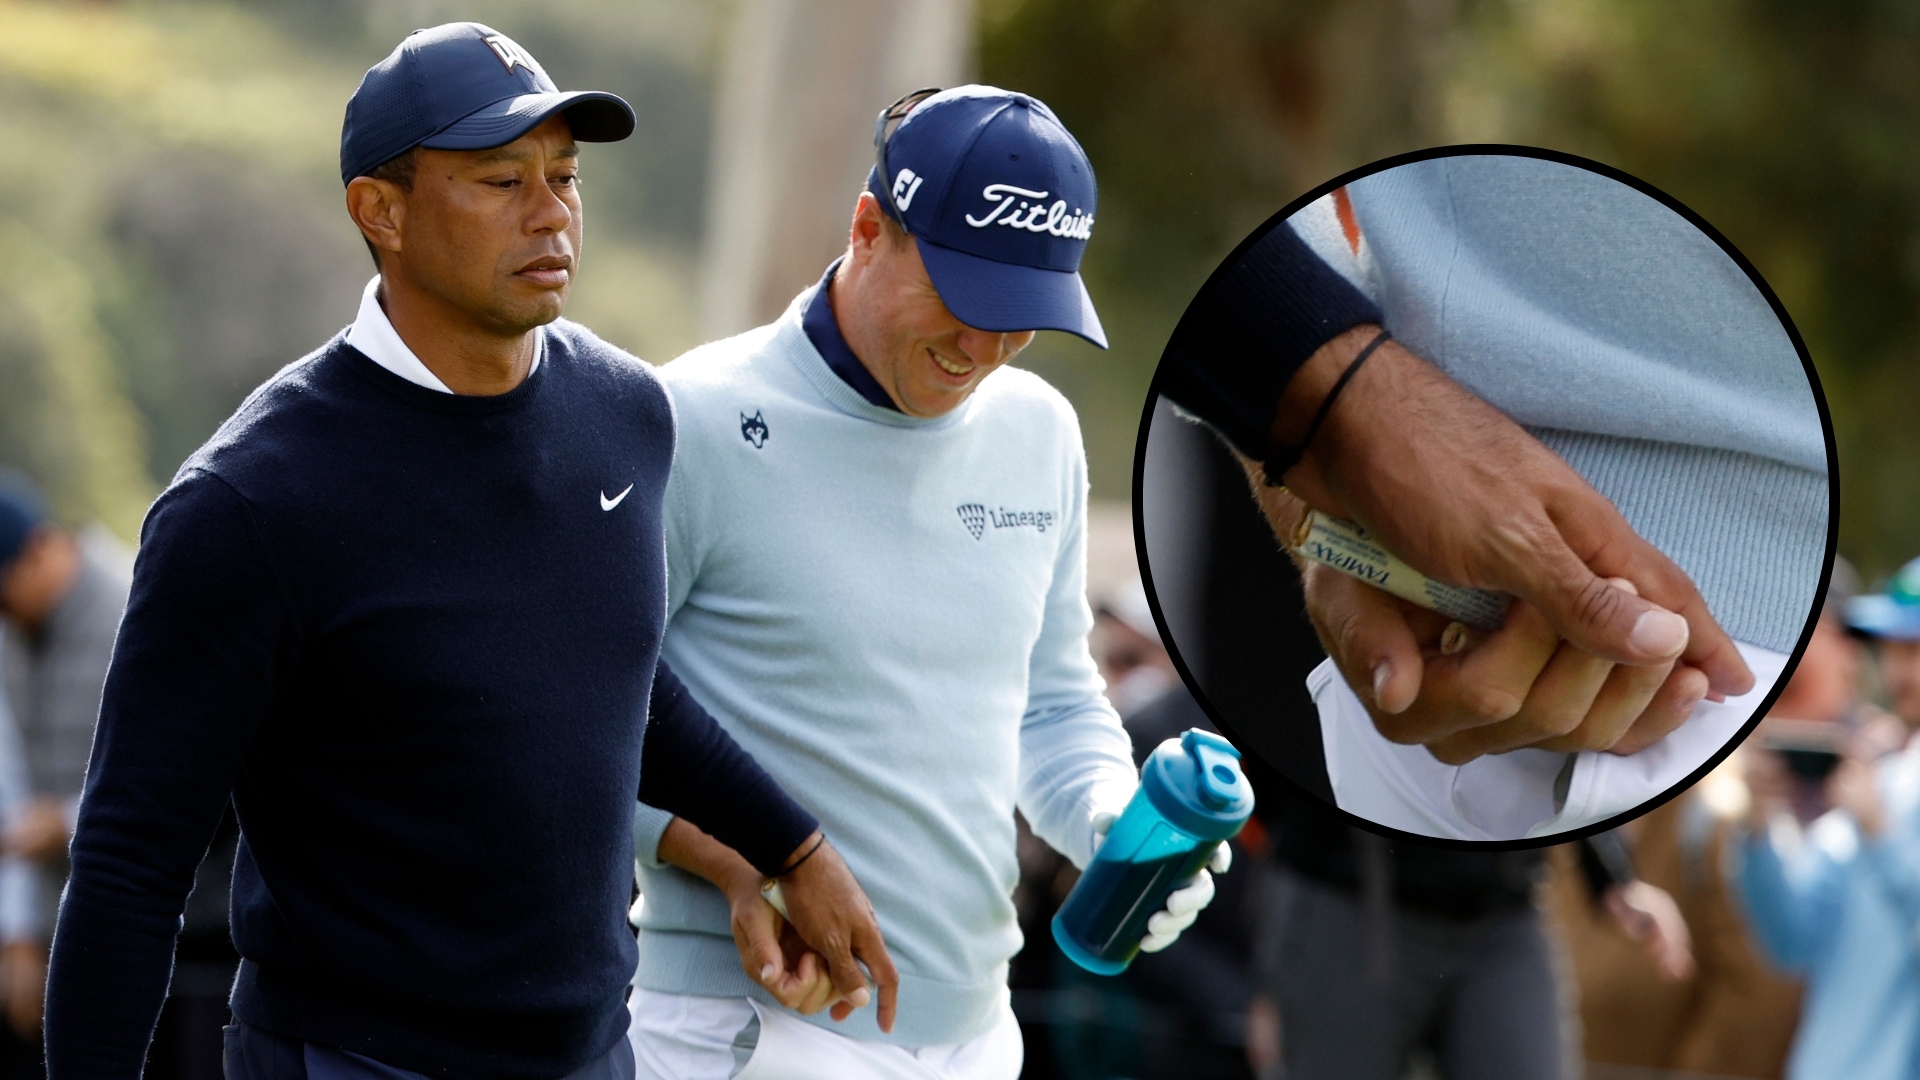 Tiger Woods apologizes after handing Justin Thomas a tampon in joke gone wrong